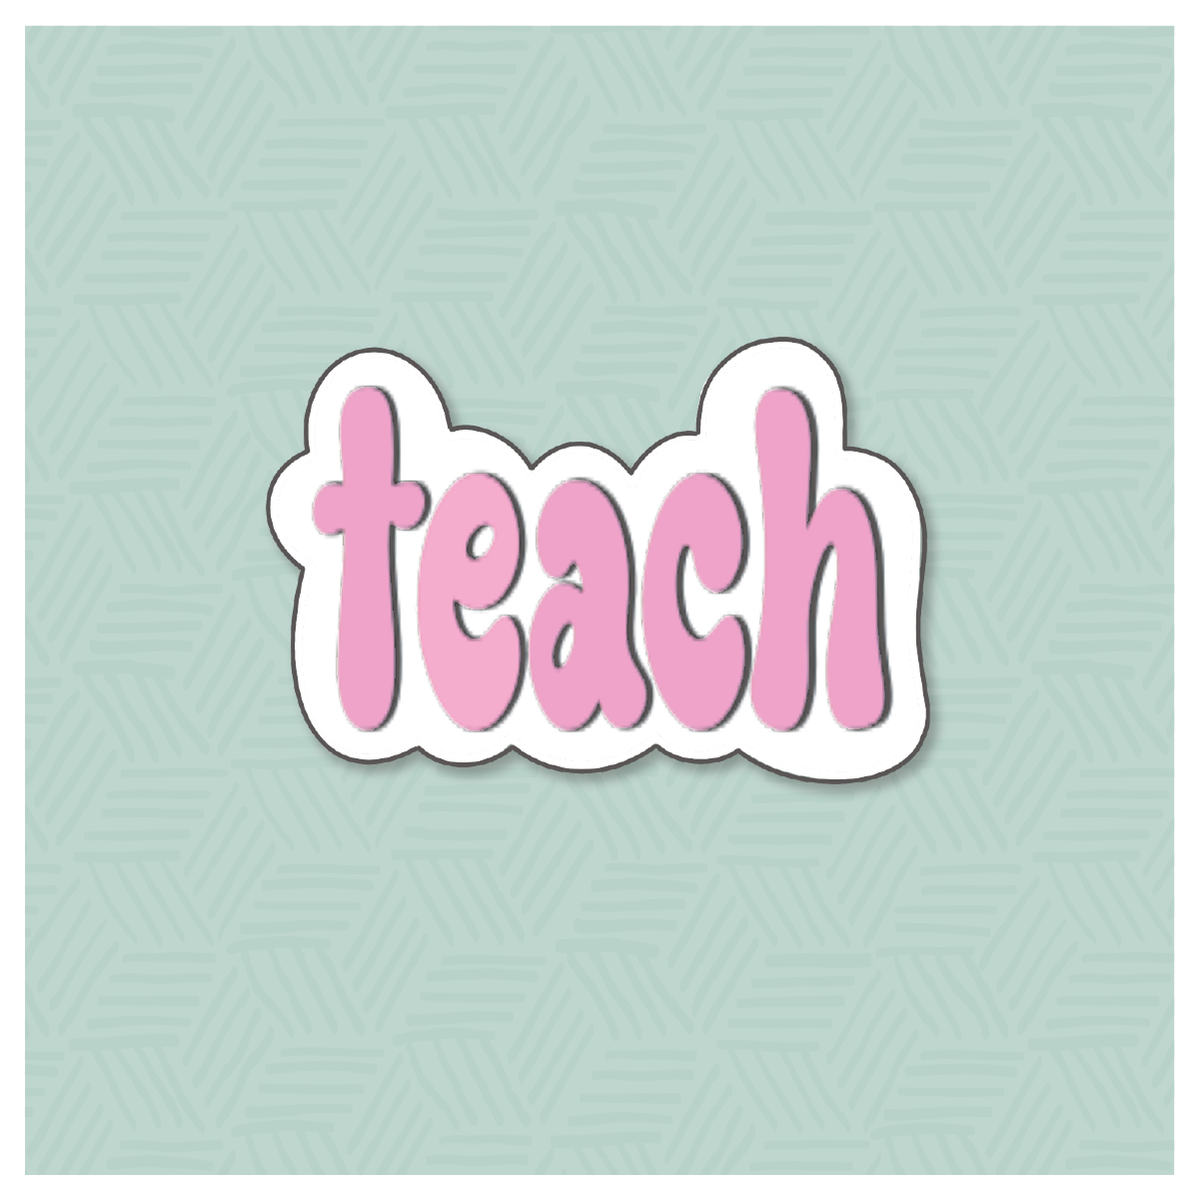 Groovy Teach Hand Lettered Cookie Cutter